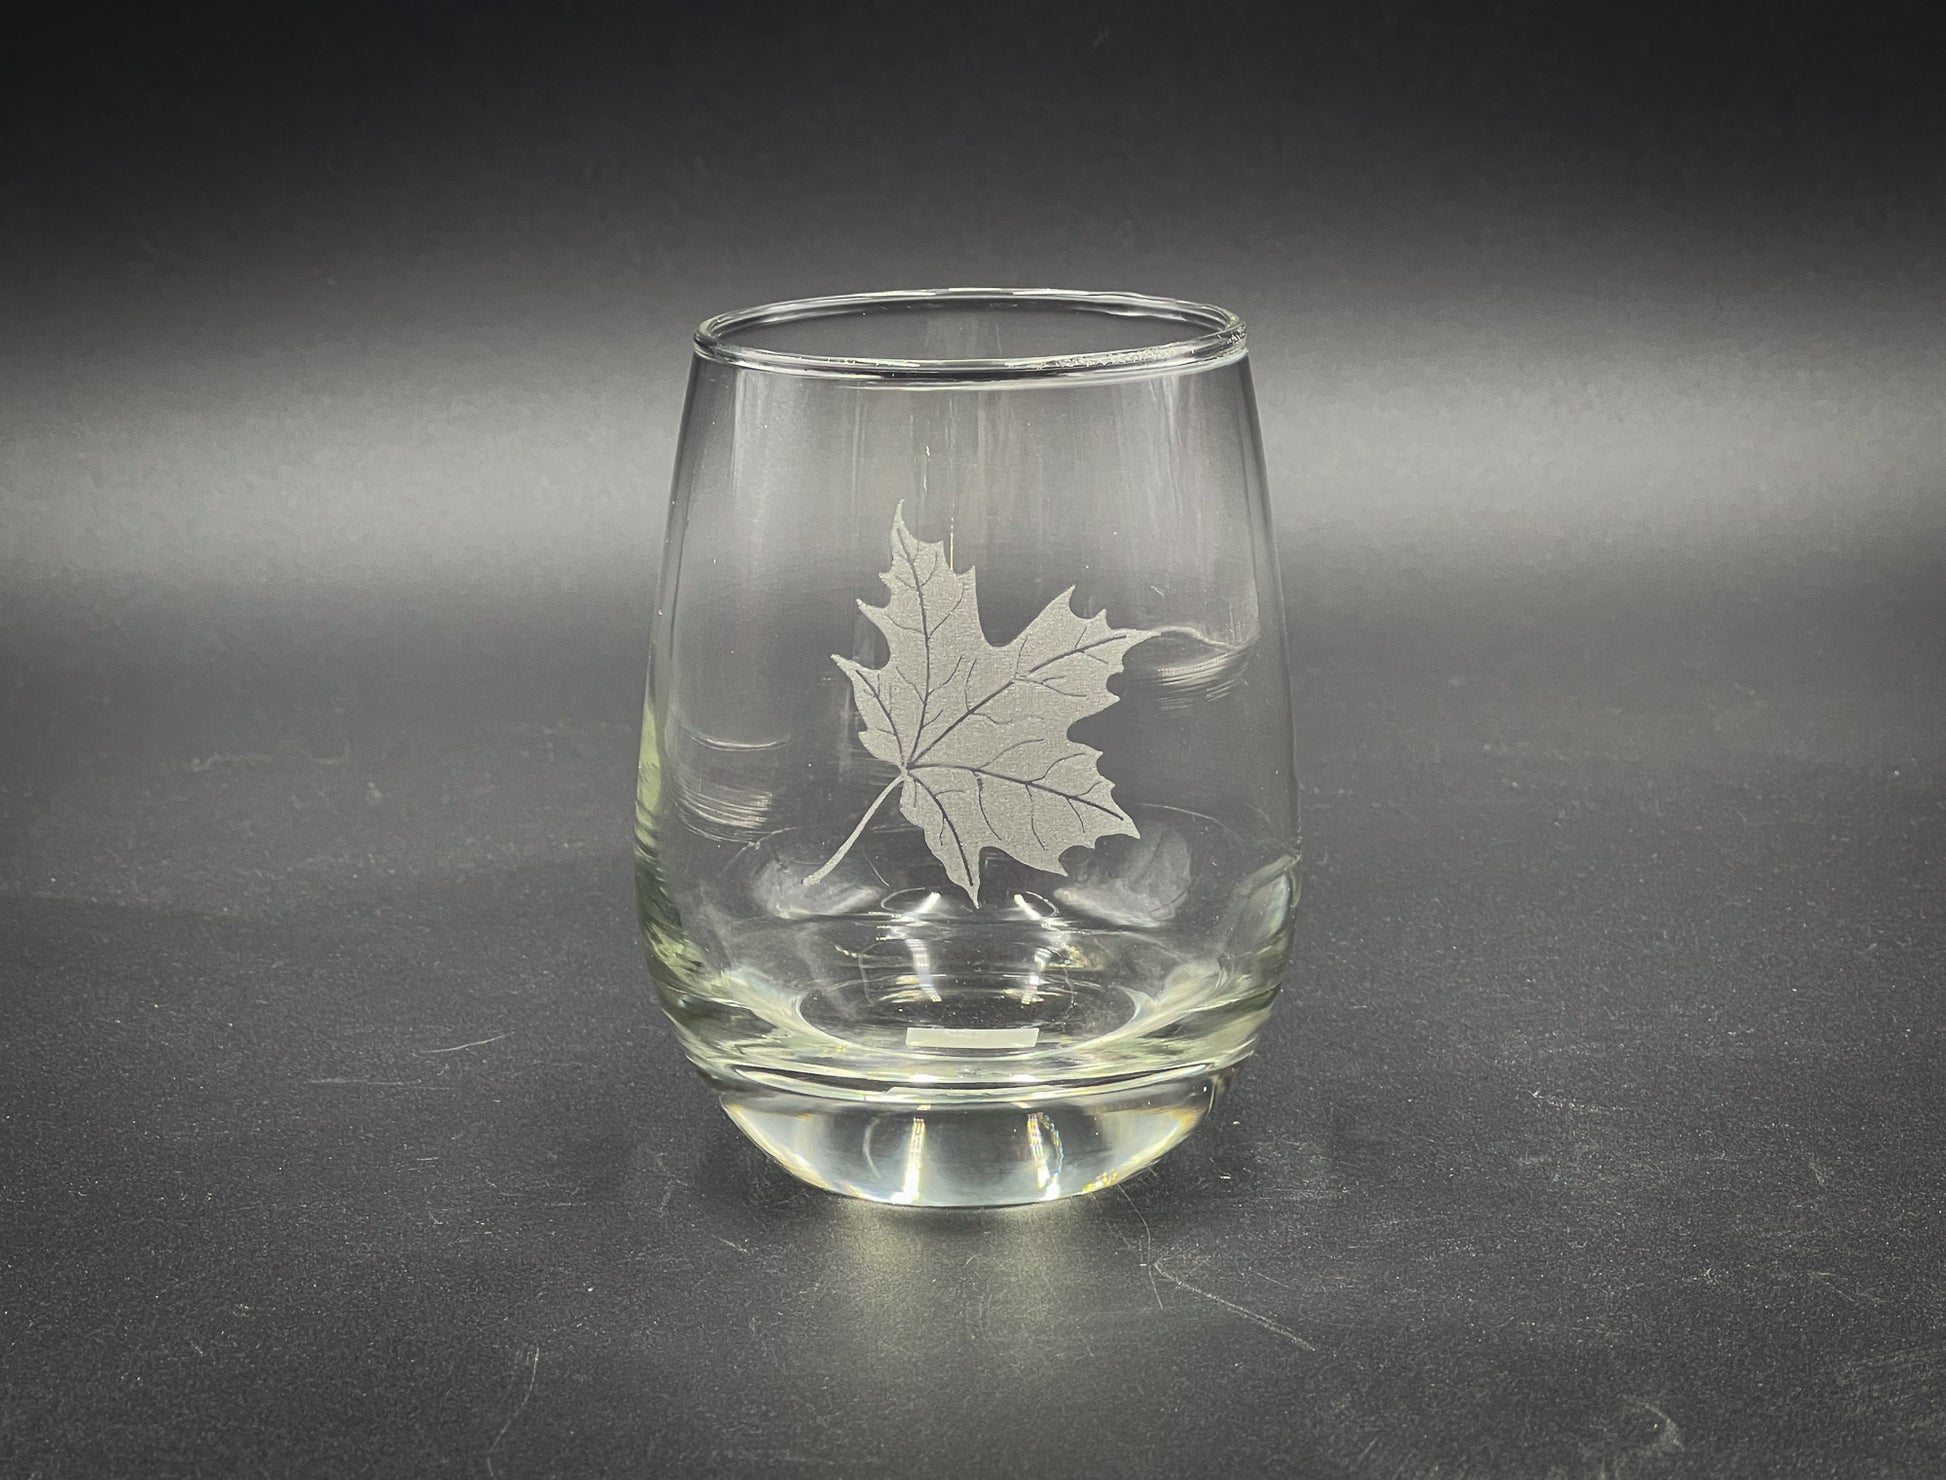 a glass with a leaf etched on it